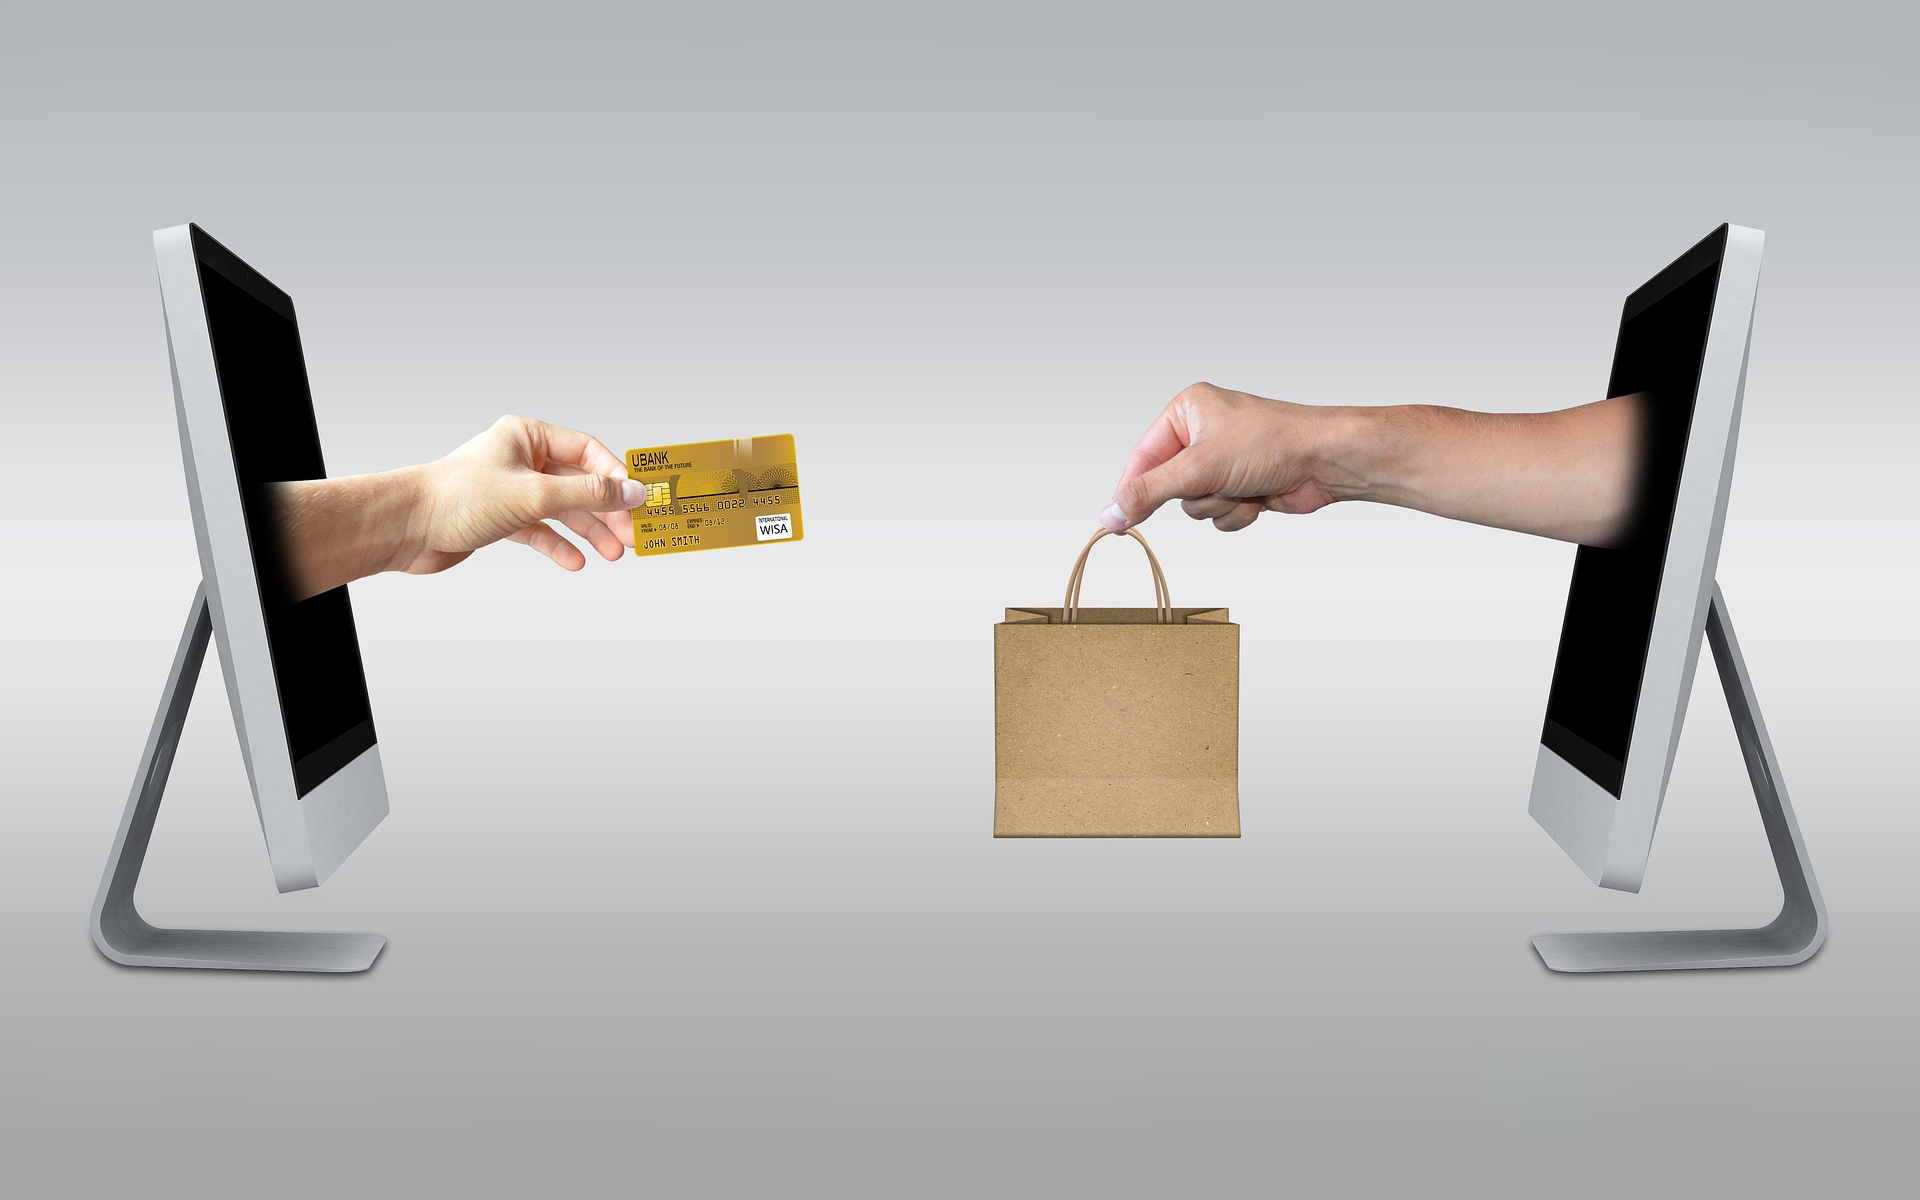 Image showing 2 computers facing each other with forearms extending from each screen exchanging a credit card and a shopping bag